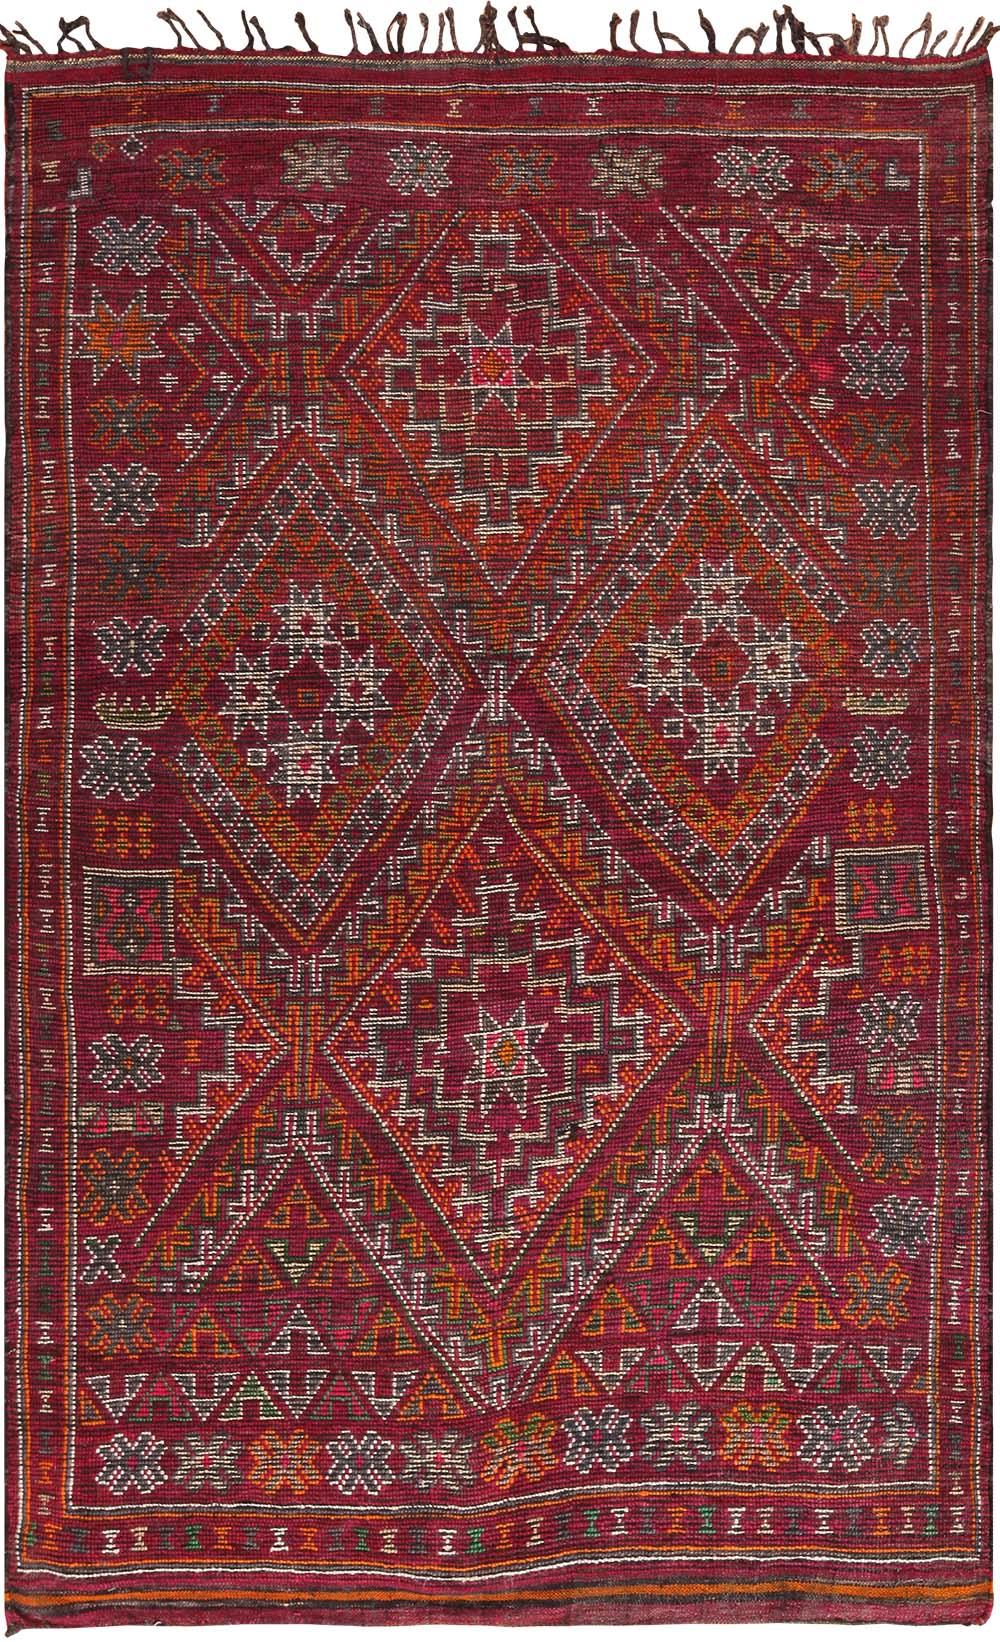 Beautiful geometric Folk Art vintage Moroccan rug, country of origin: Morocco, date: circa 1980. Size: 5 ft 7 in x 8 ft 8 in (1.7 m x 2.64 m).